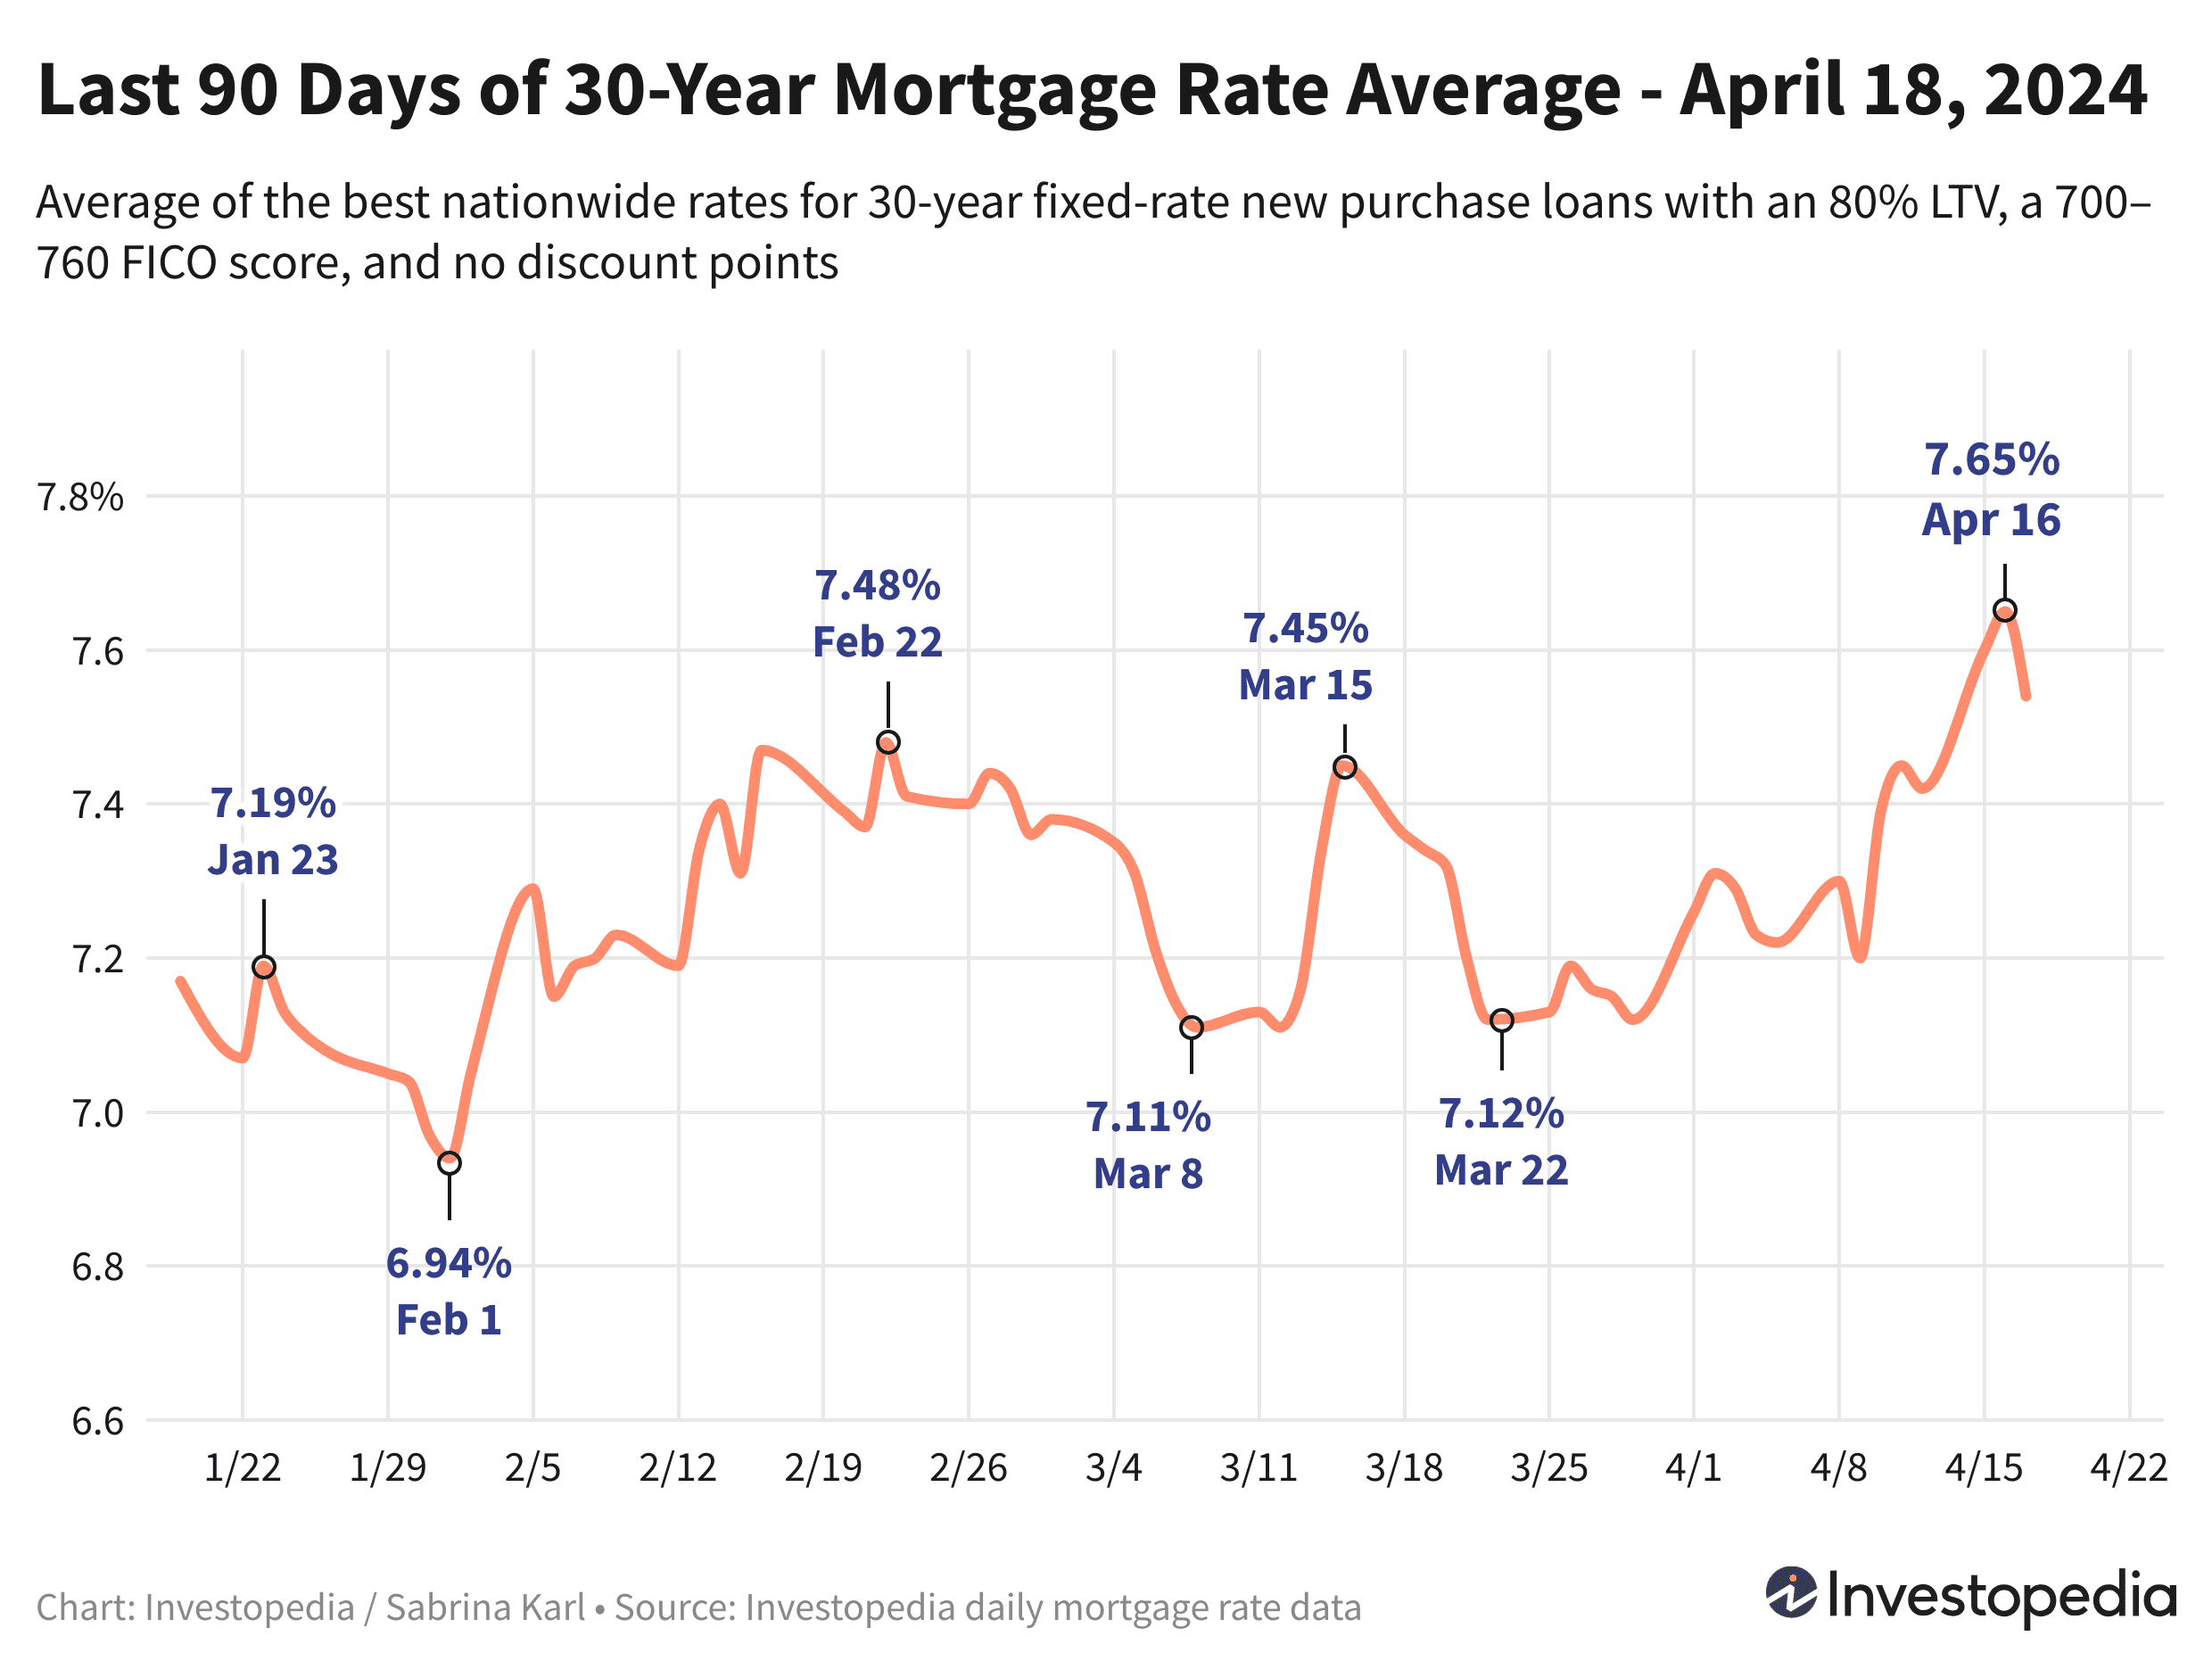 Line graph showing the last 90 days of the 30-year new purchase mortgage rate average - April 18, 2024